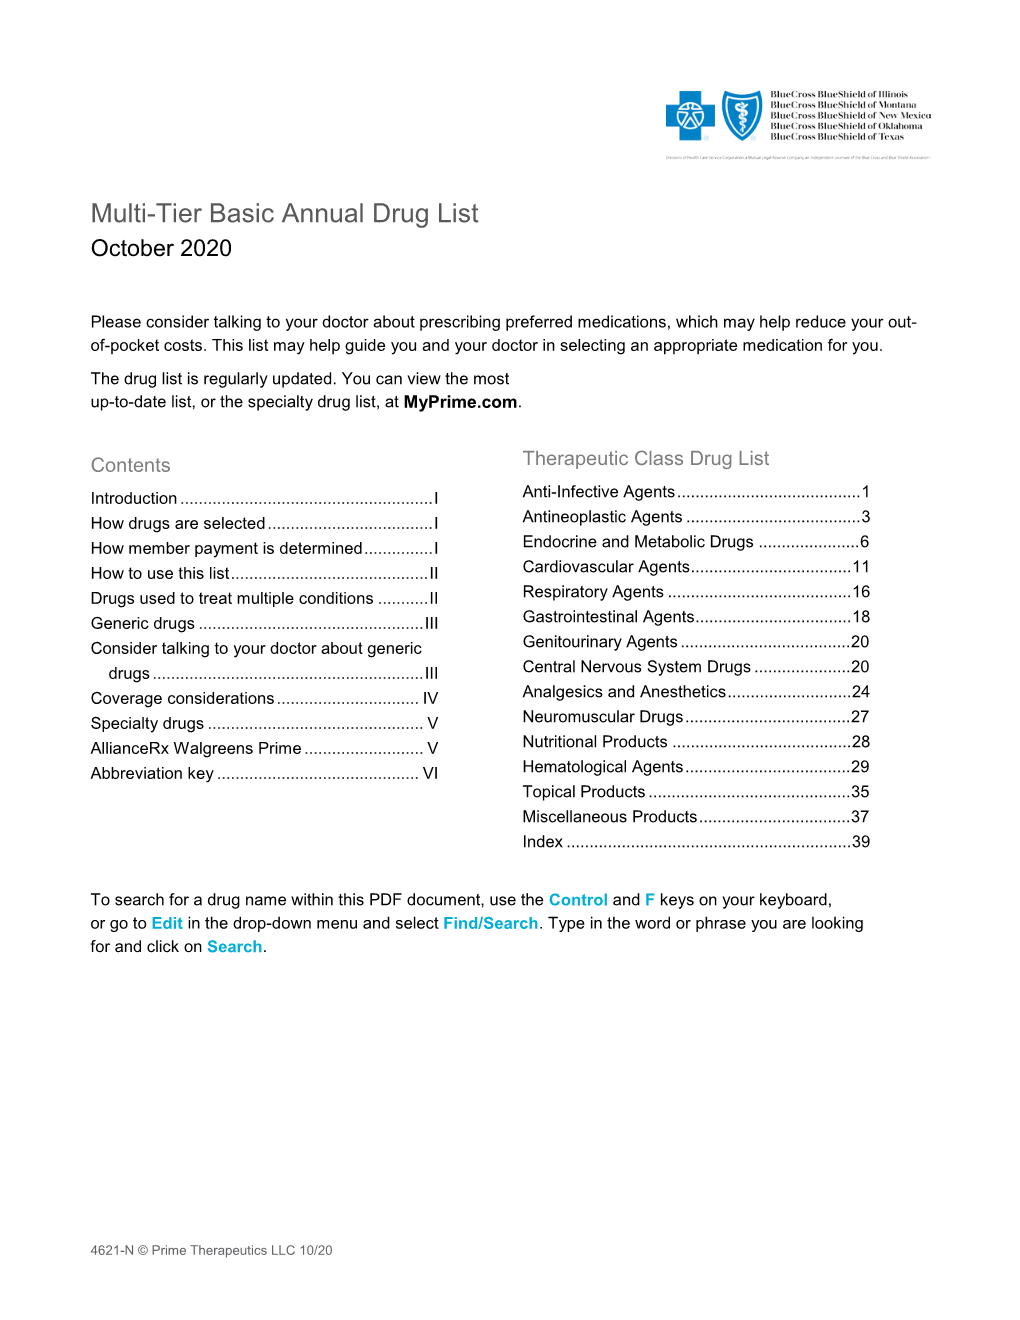 Blue Cross and Blue Shield October 2020 Multi-Tier Basic Annual Drug List I How to Use This List Generic Drugs Are Shown in Lower-Case Boldface Type